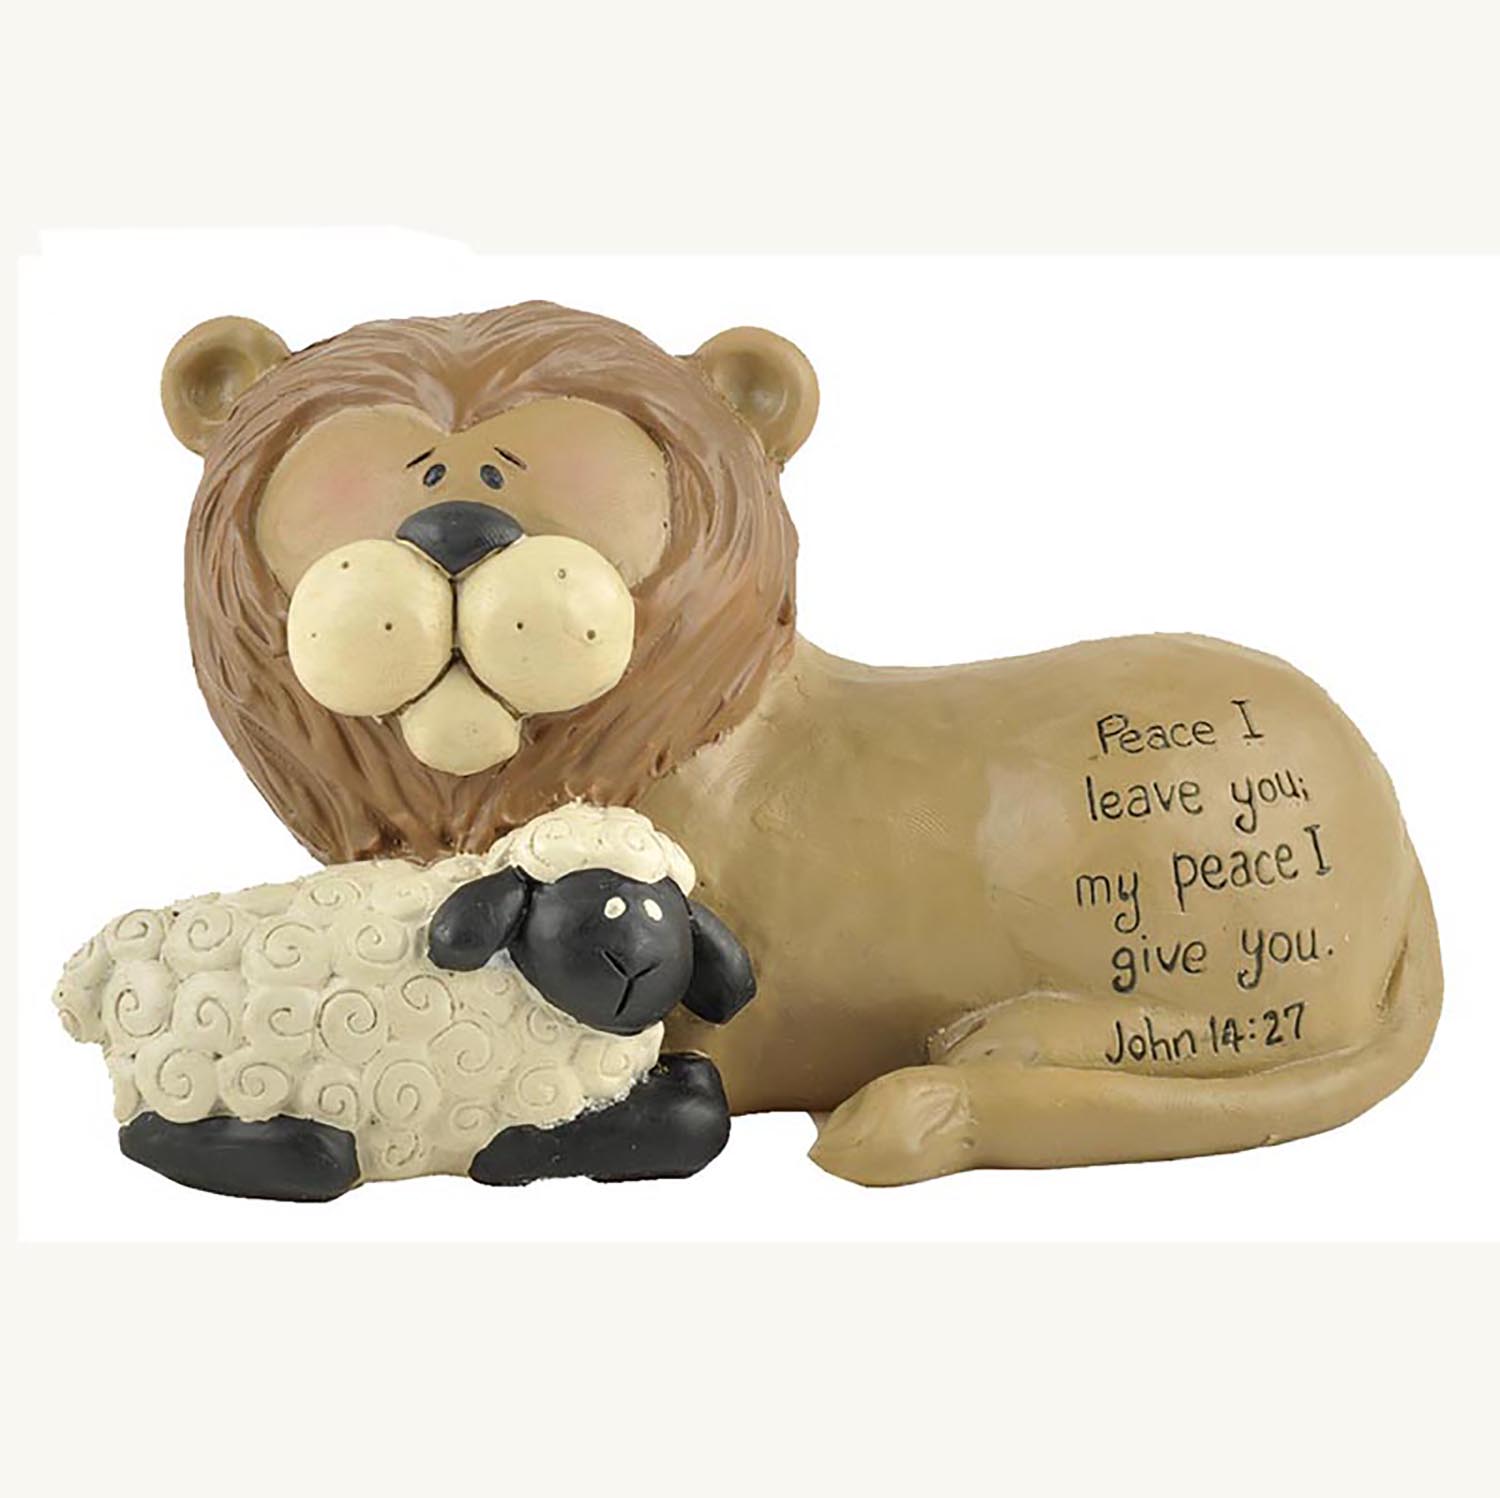 Peaceful Lion and Lamb Resin Figurine - Inspiring Faith Decor for Home, Office, and Church1211-87510